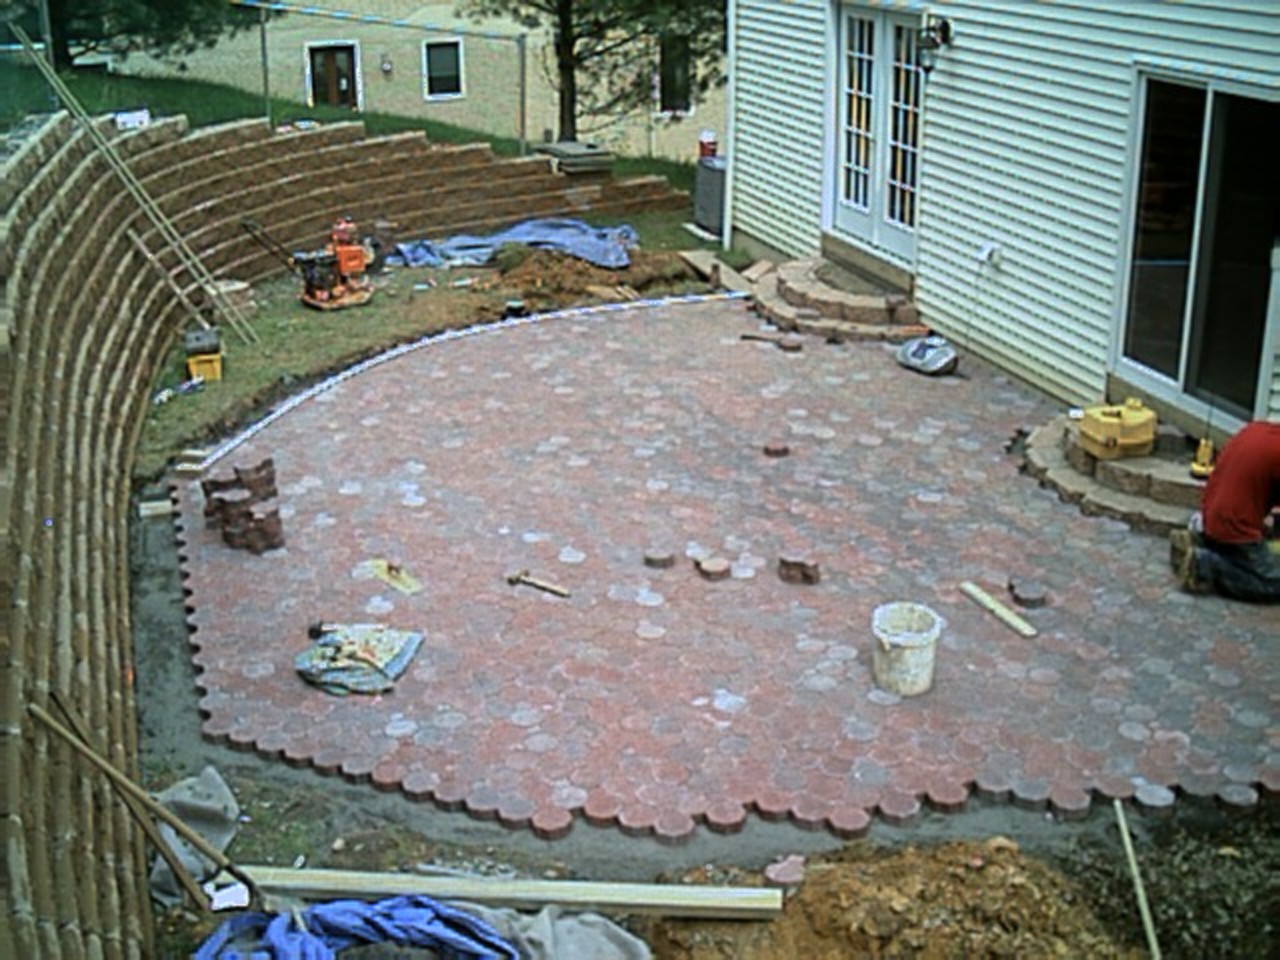 Now we are almost done with the patio!